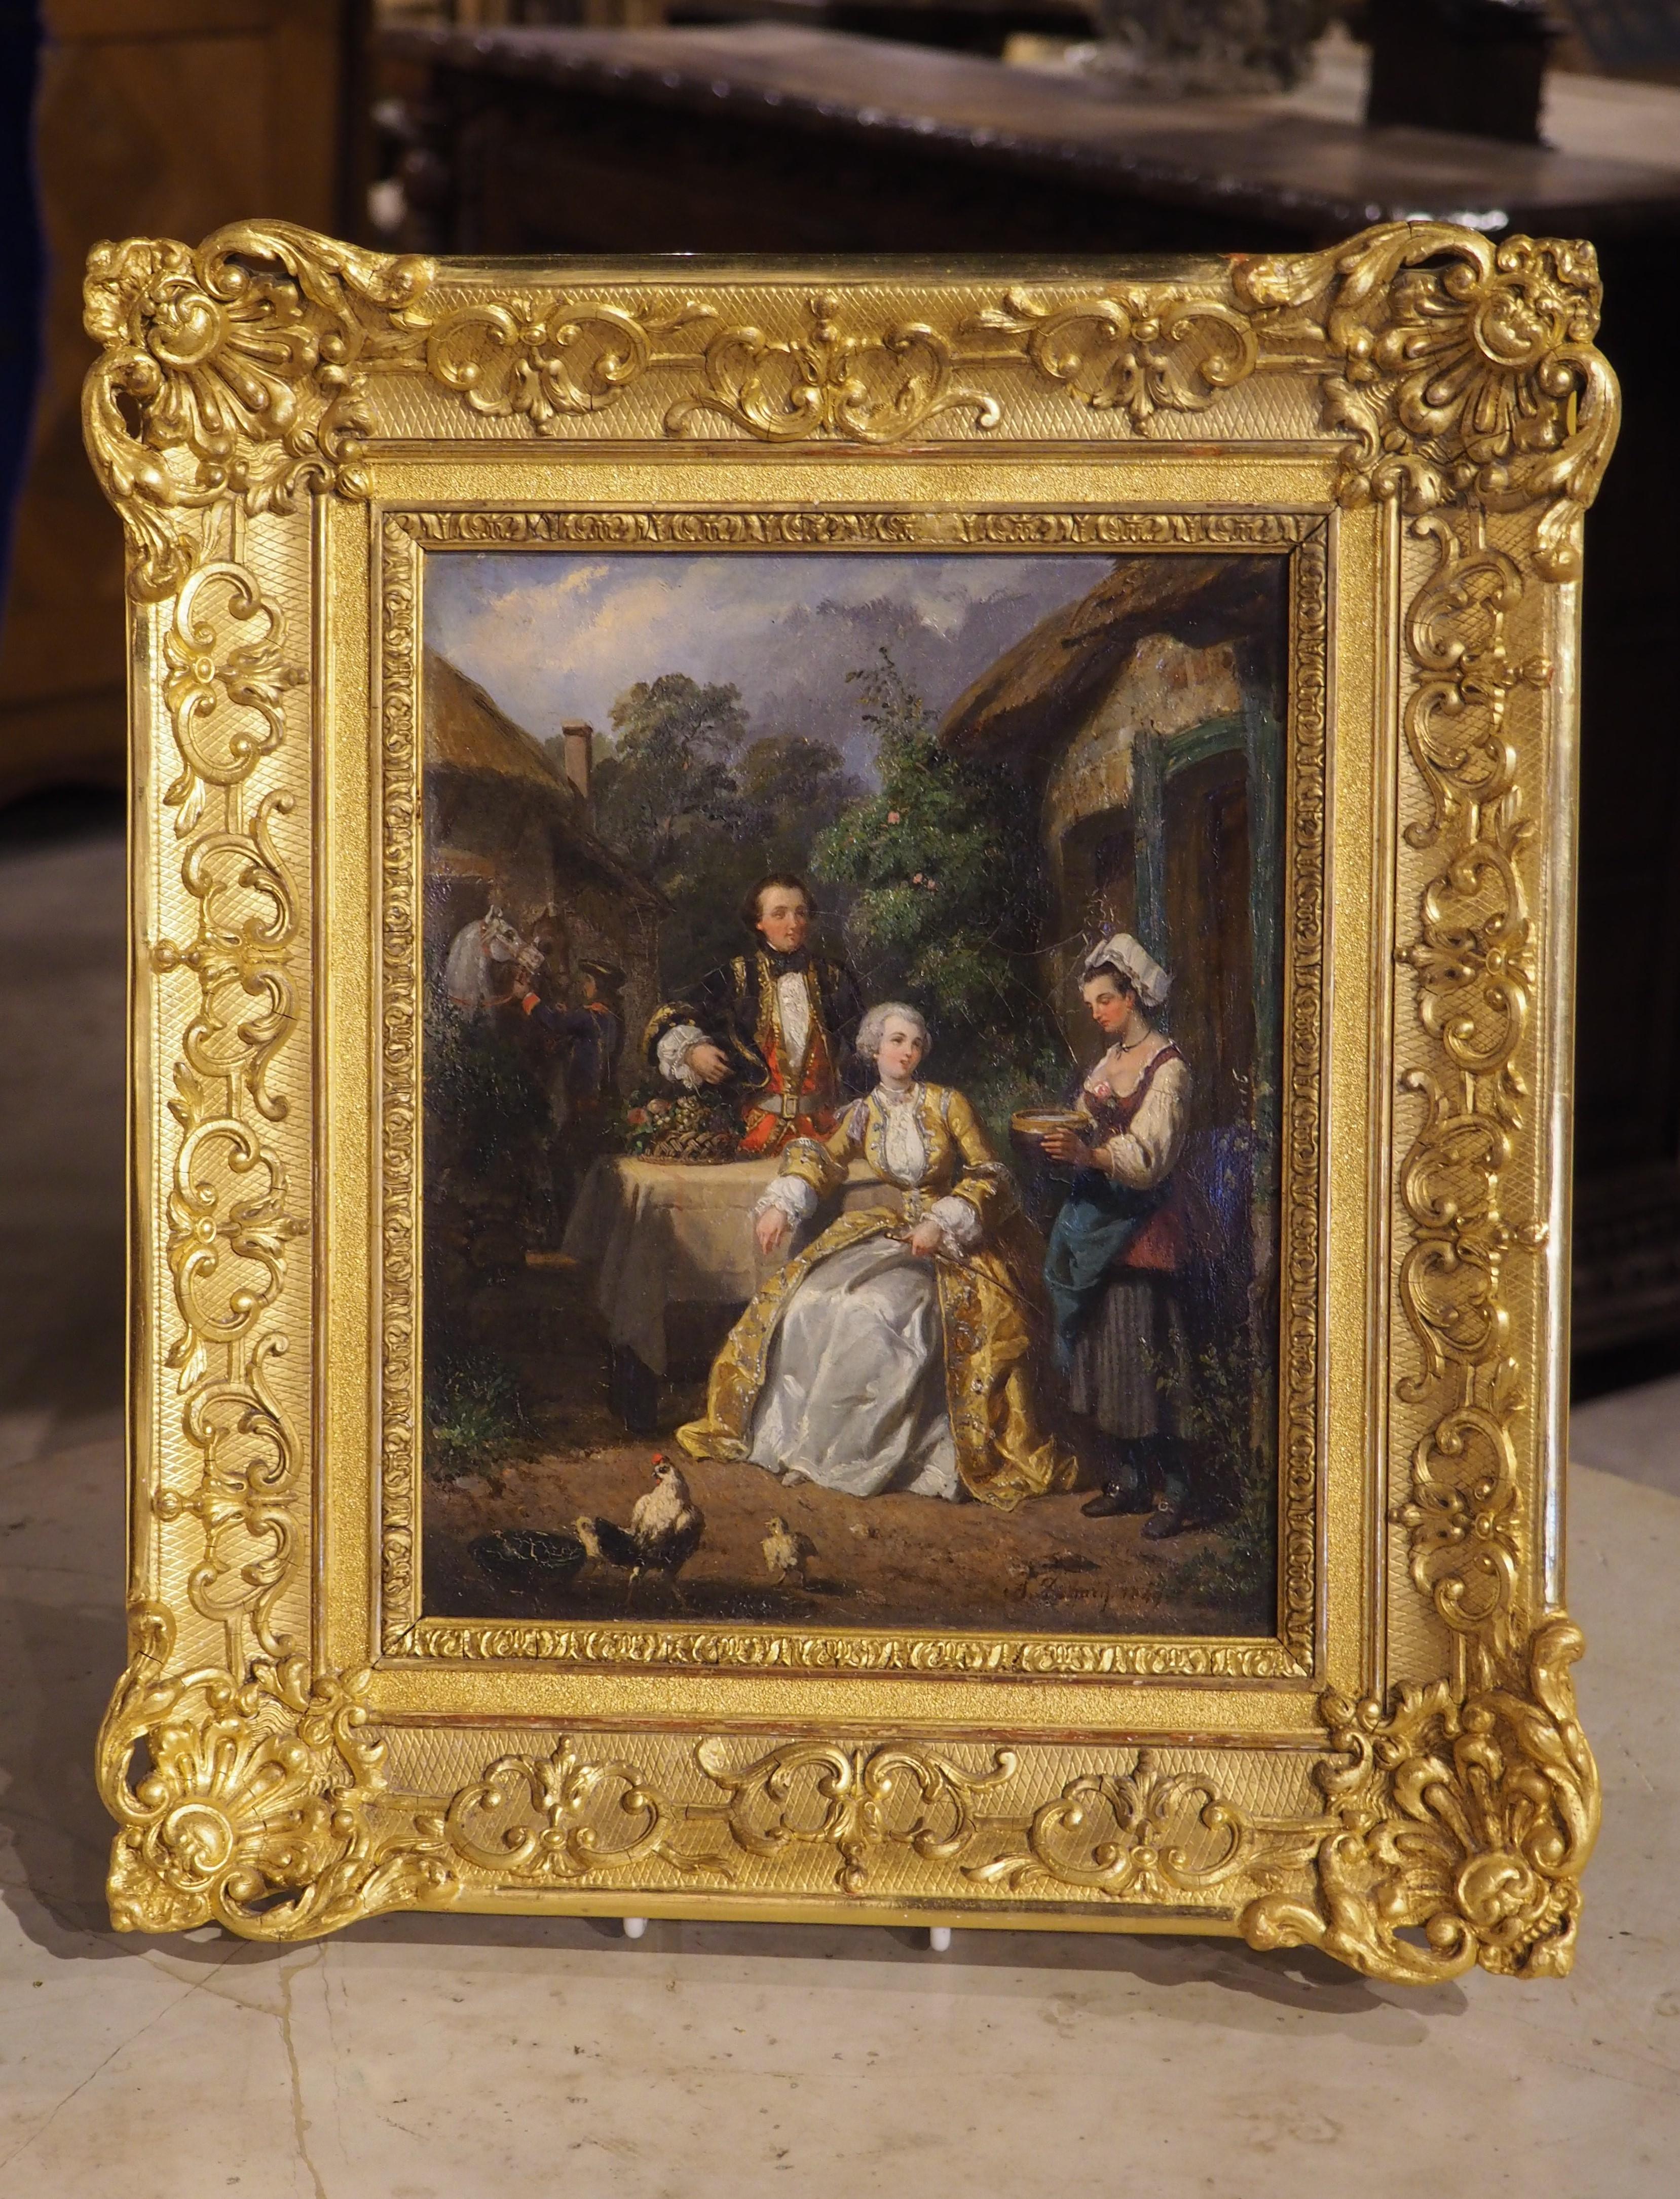 19th Century A Rest in the Courtyard, Antique French Oil on Canvas, Charles Alexandre DeBacq For Sale